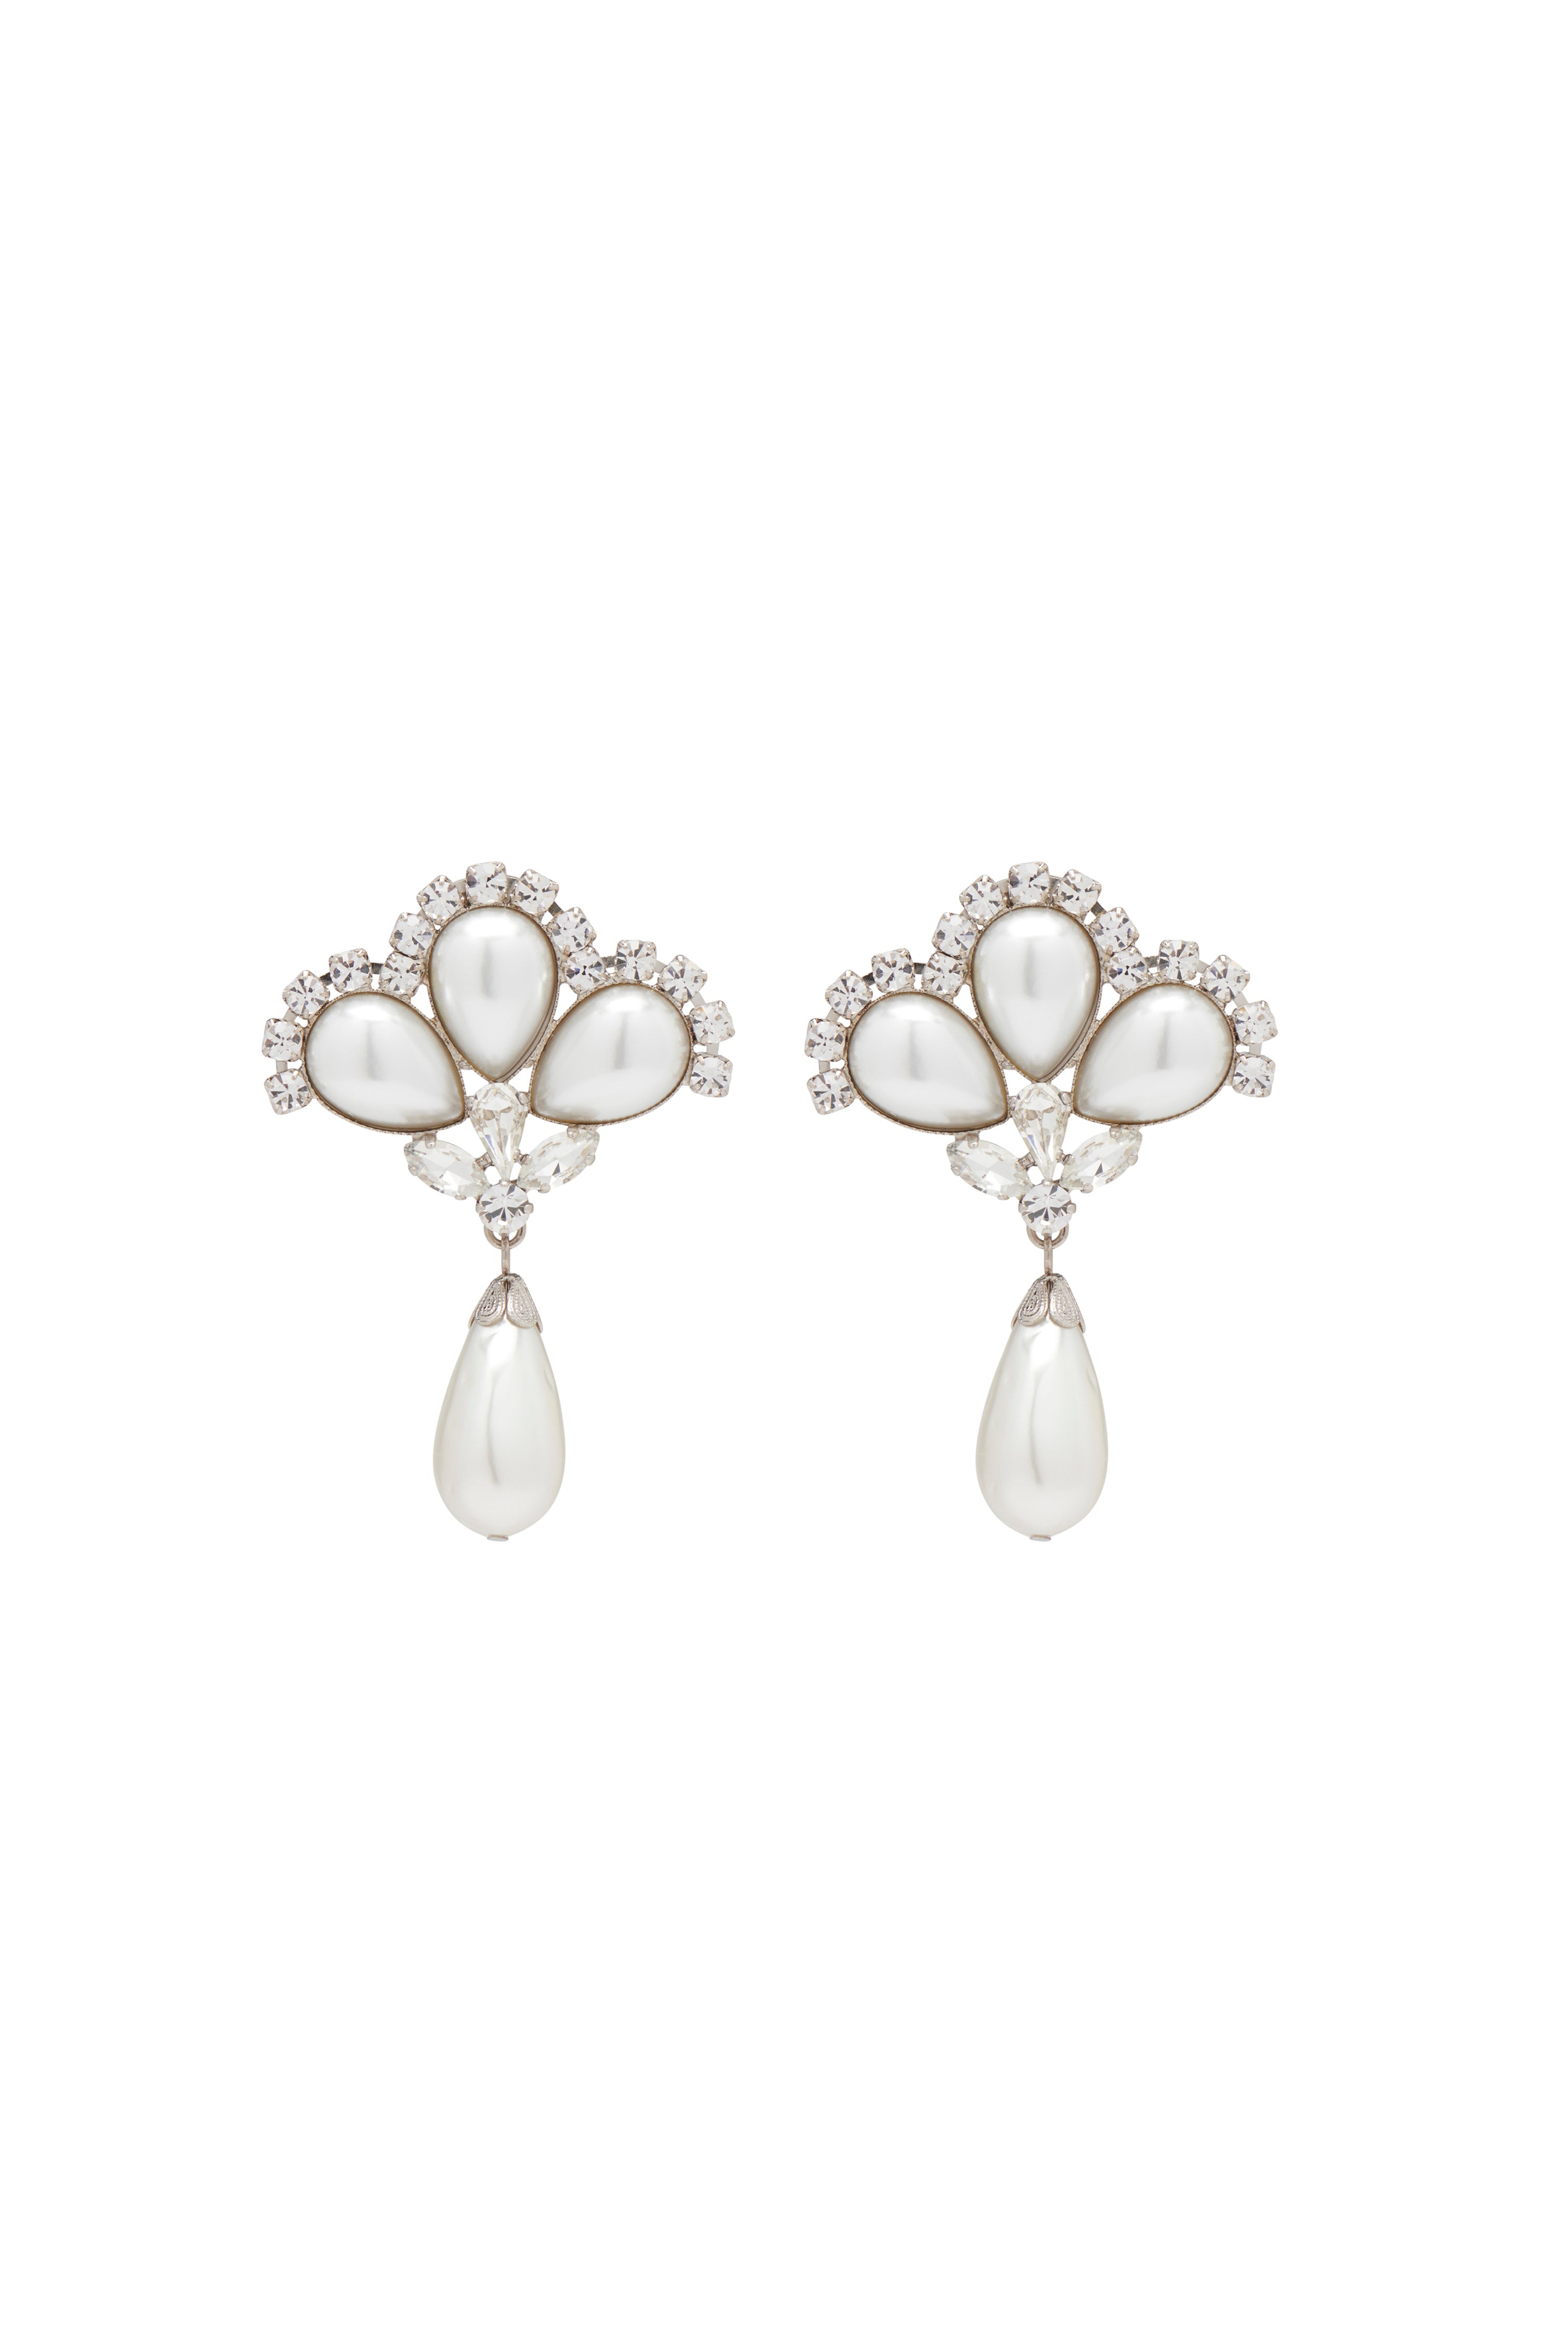 PEARL EARRINGS WITH PENDANT - 1